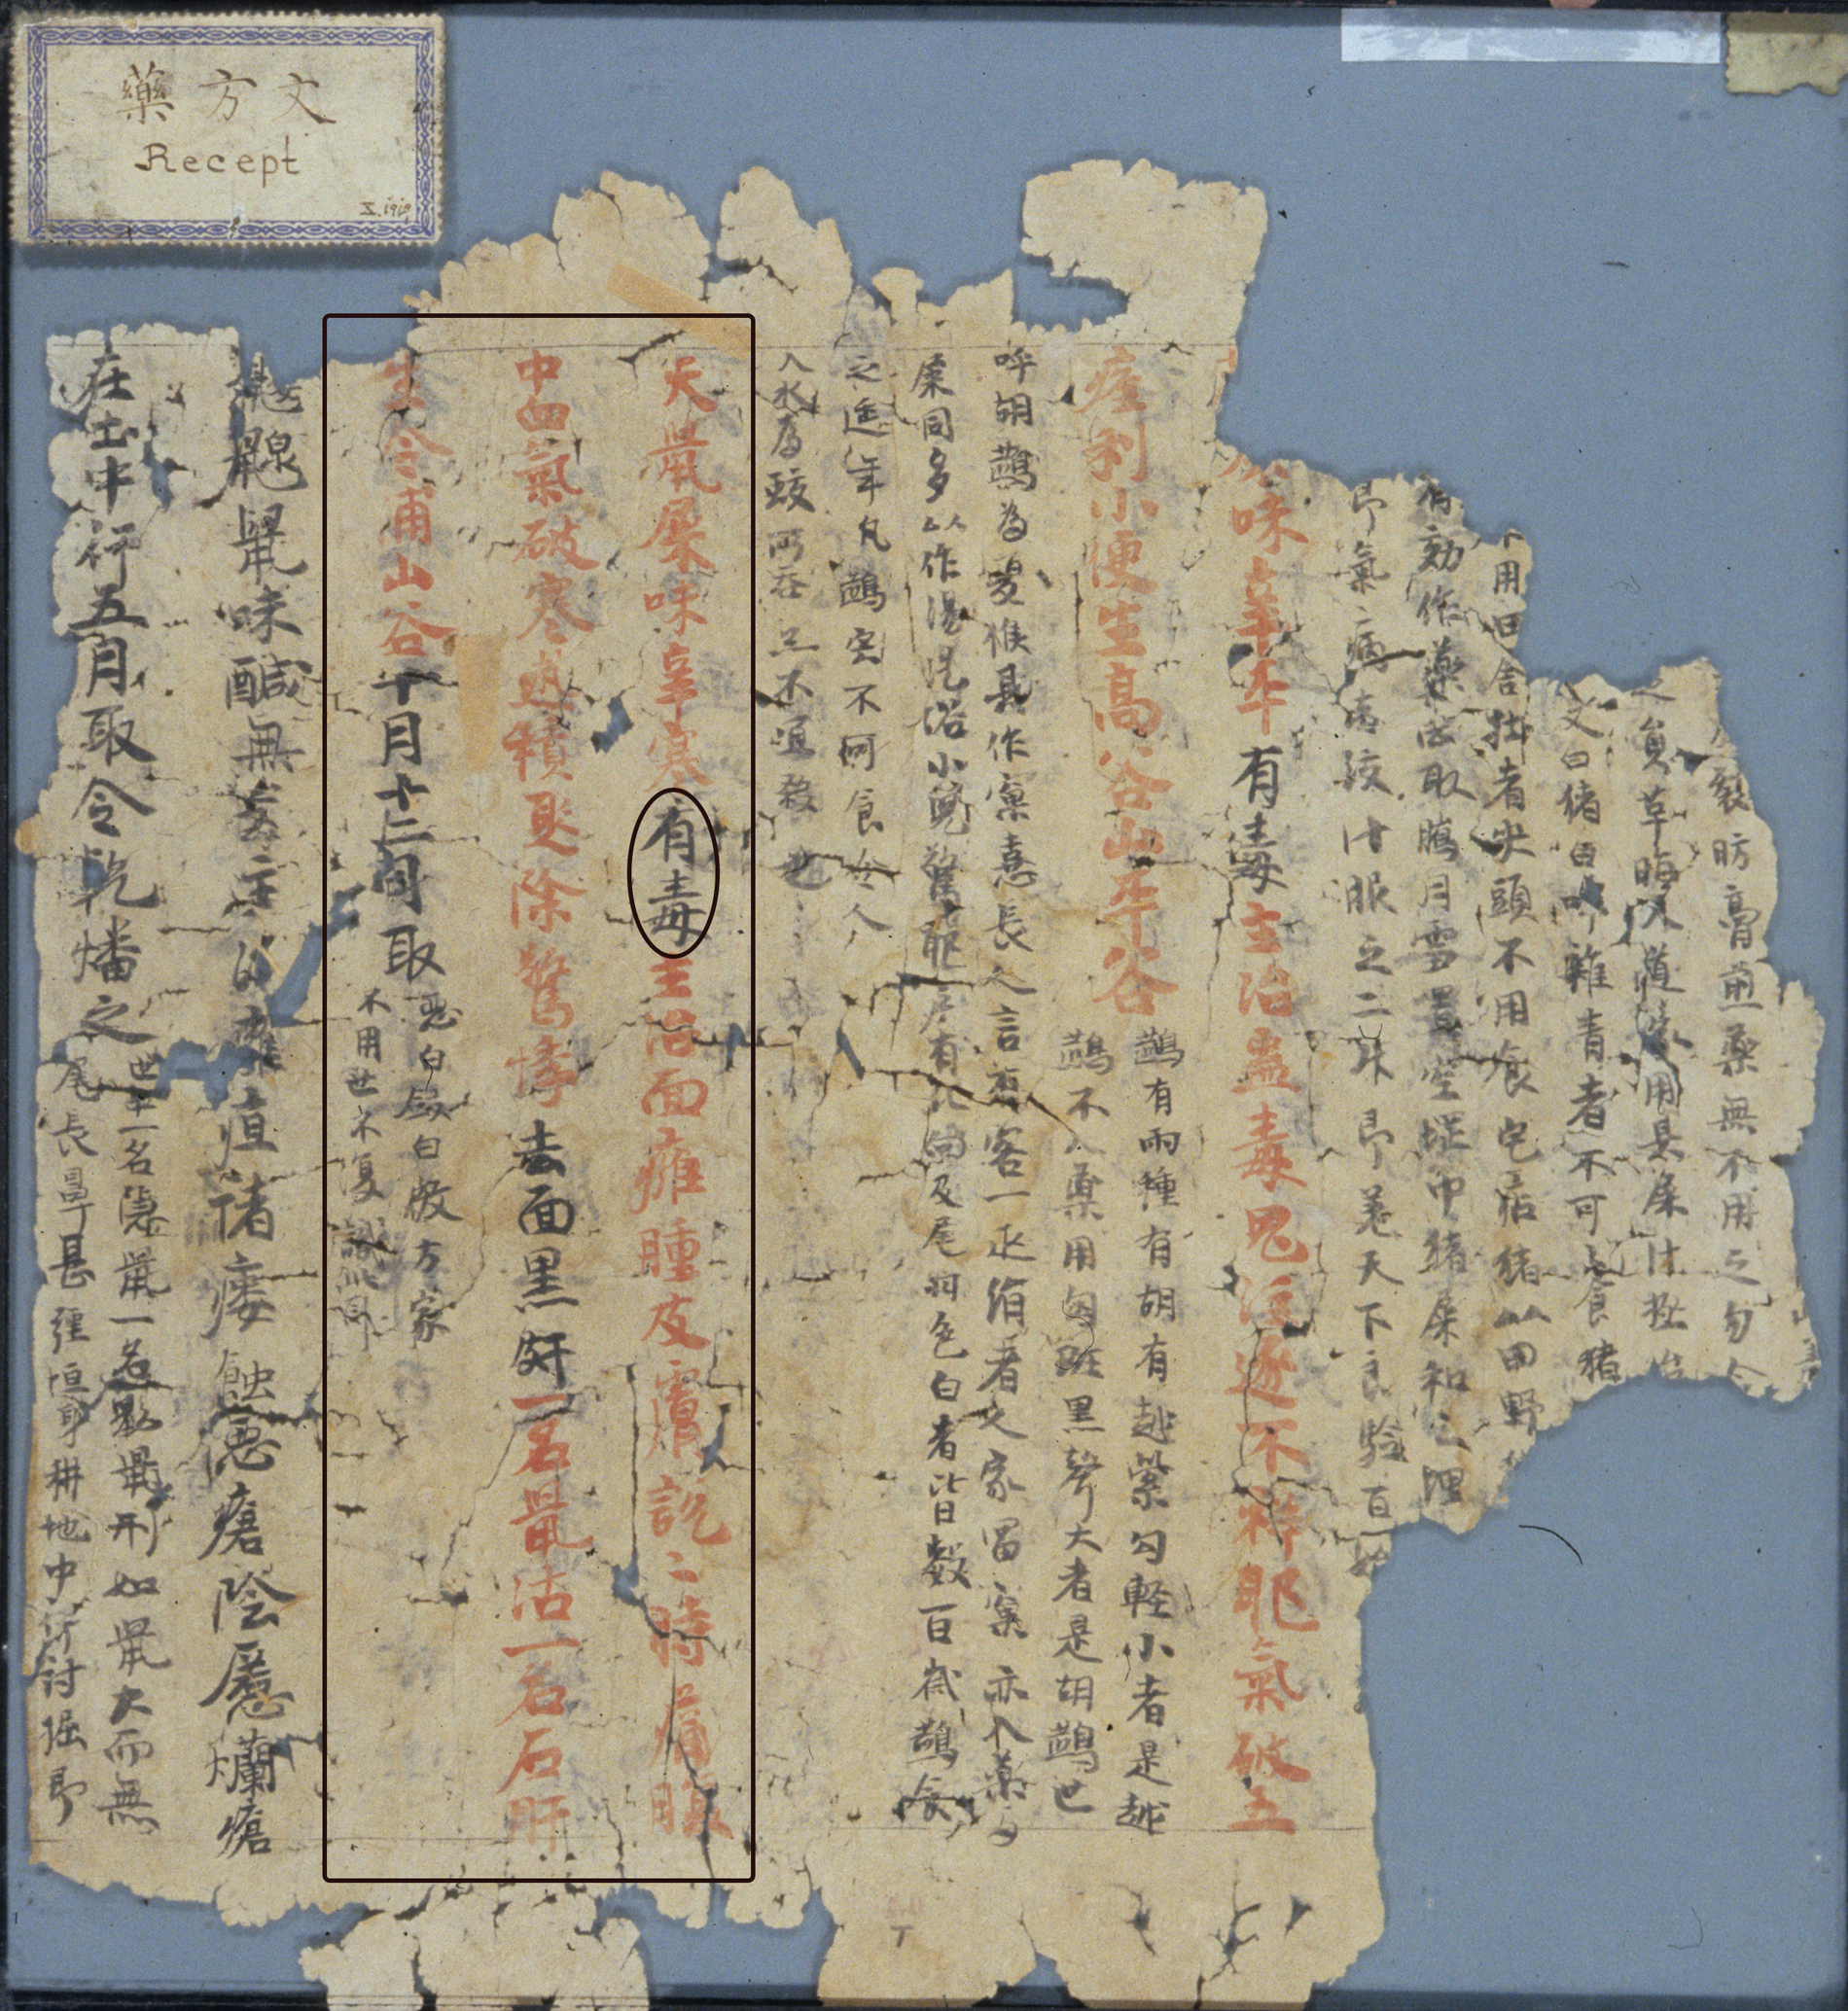 A manuscript fragment with torn edges contains handwritten Chinese text in alternating sections of black and red ink, and differently sized script. One section is overlain with a box, drawing attention to the drug entry on bat droppings. The <i>du</i> status of the drug is overlain with a circle around the words “possessing <i>du</i>” (<i>youdu</i>).